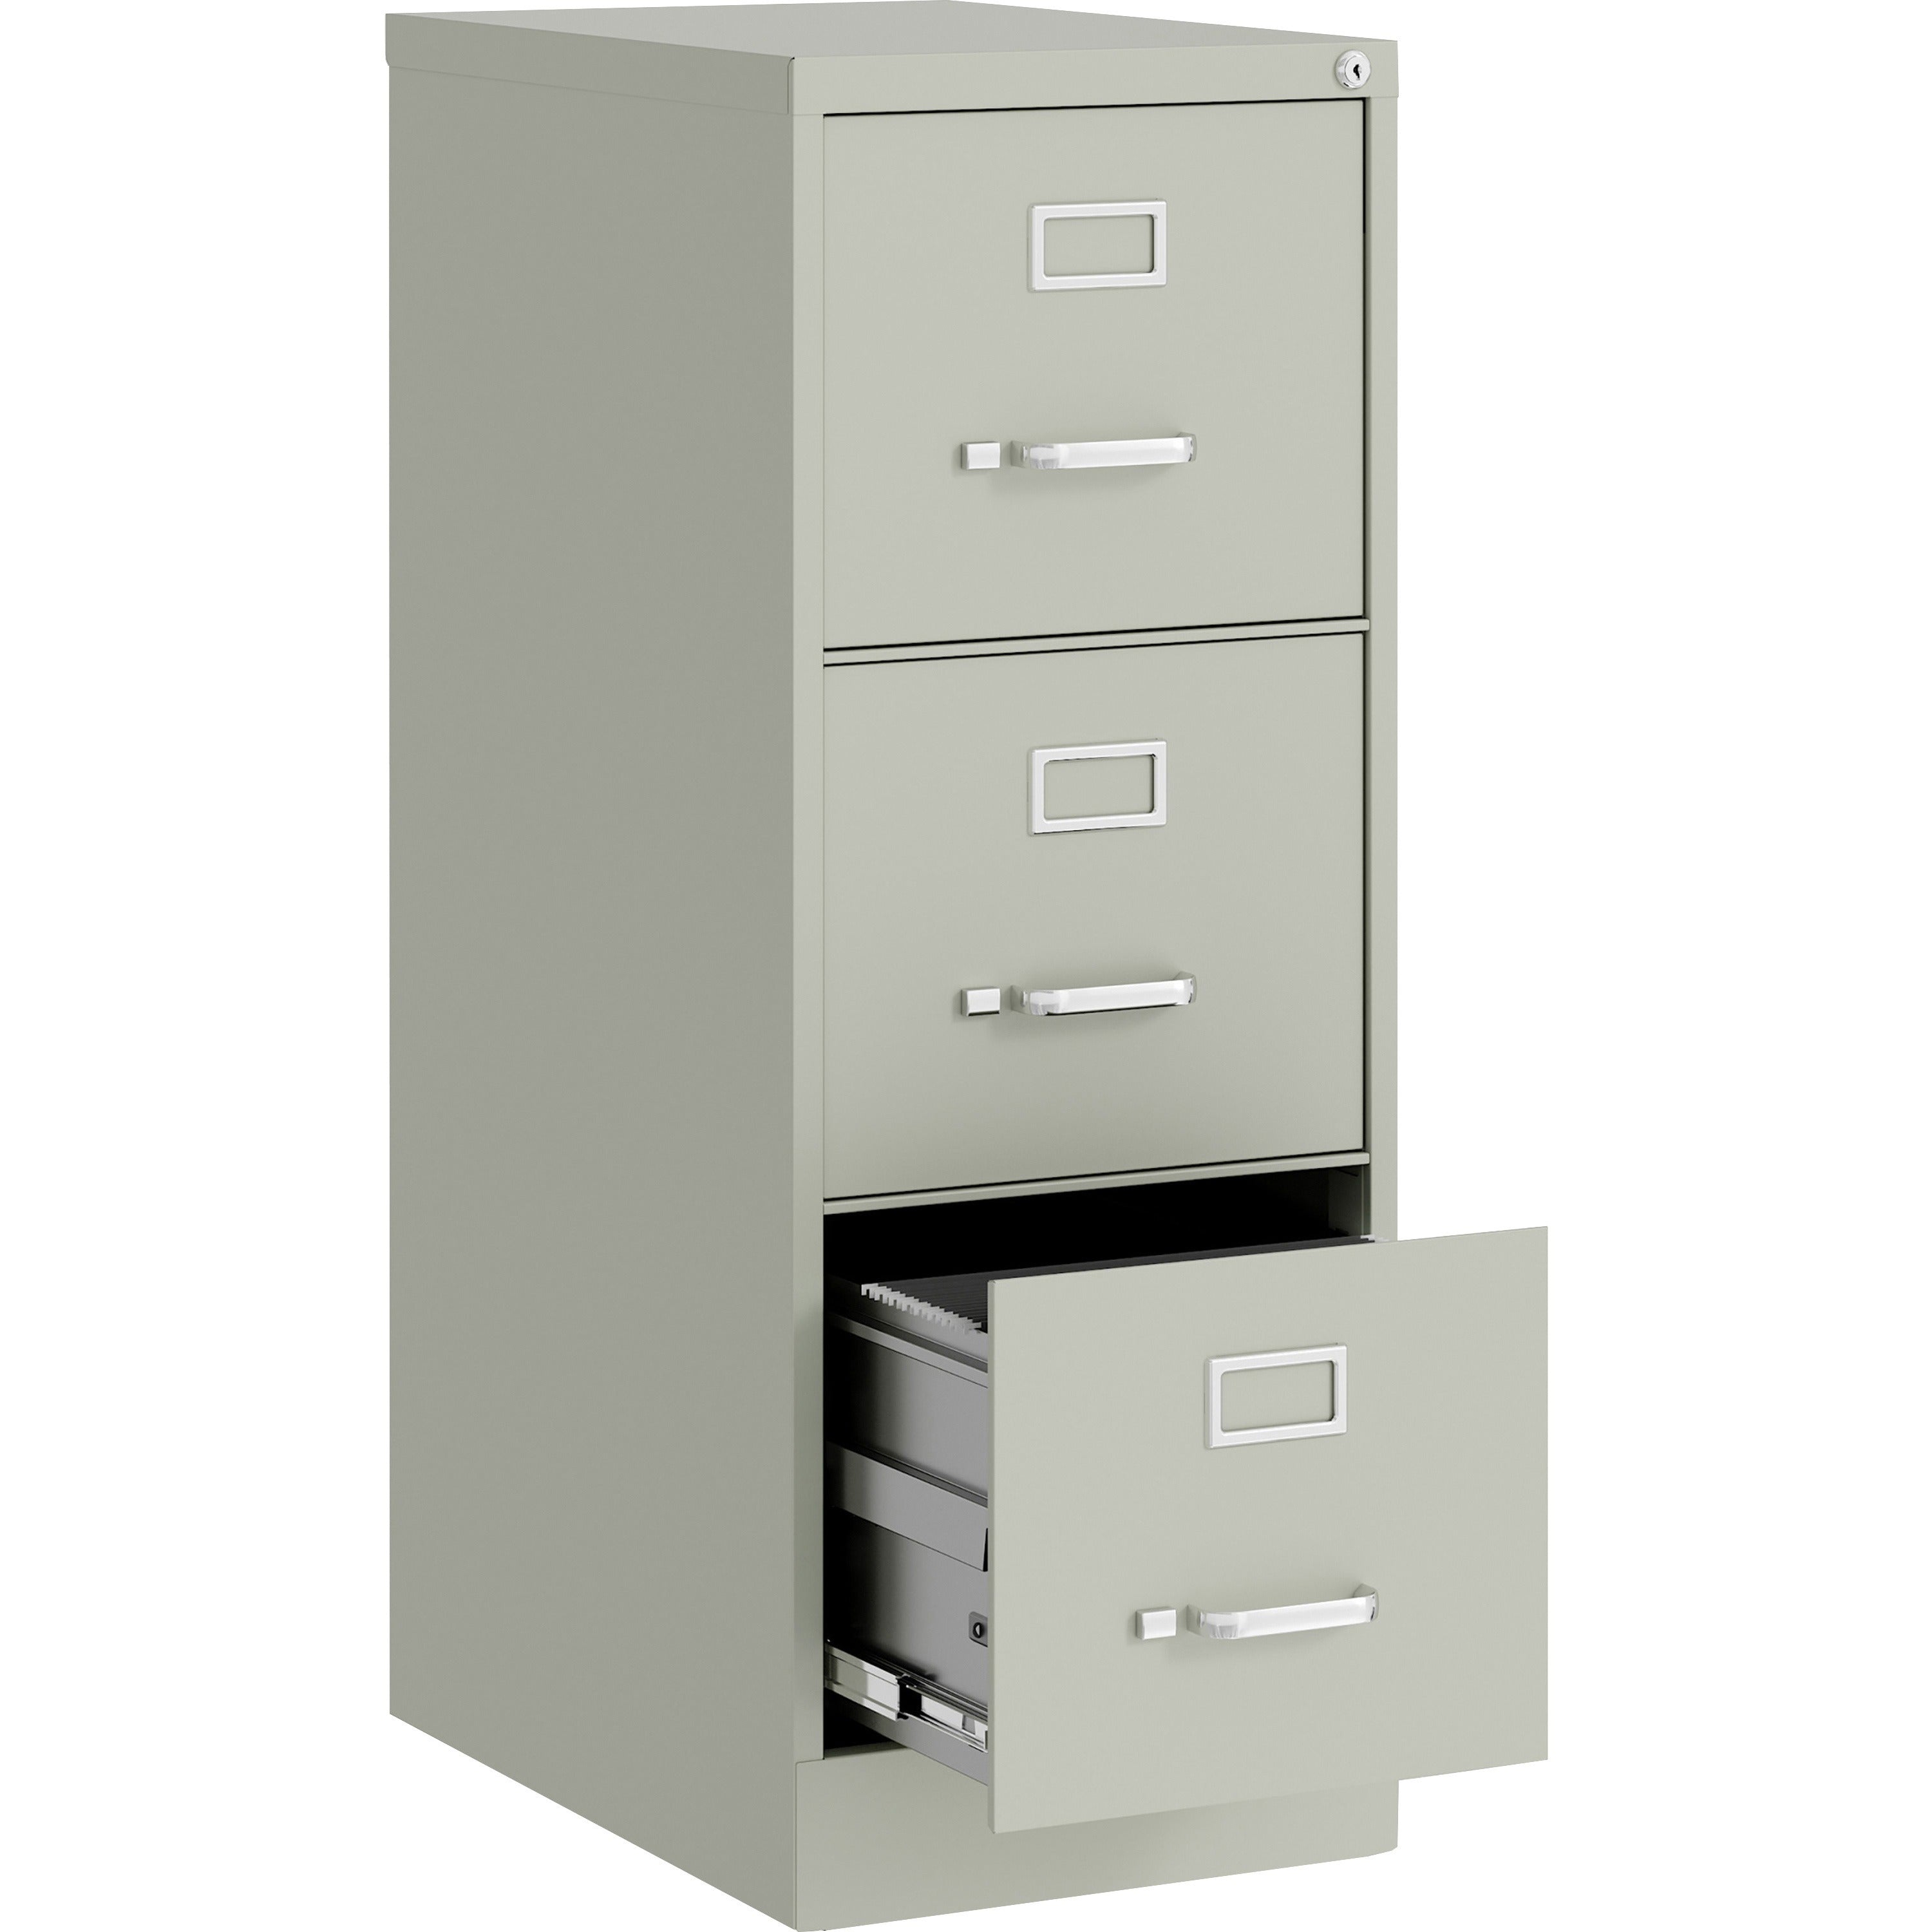 lorell-fortress-series-22-commercial-grade-vertical-file-cabinet-15-x-22-x-402-3-x-drawers-for-file-letter-vertical-ball-bearing-suspension-removable-lock-pull-handle-wire-management-light-gray-steel-recycled_llr42298 - 4